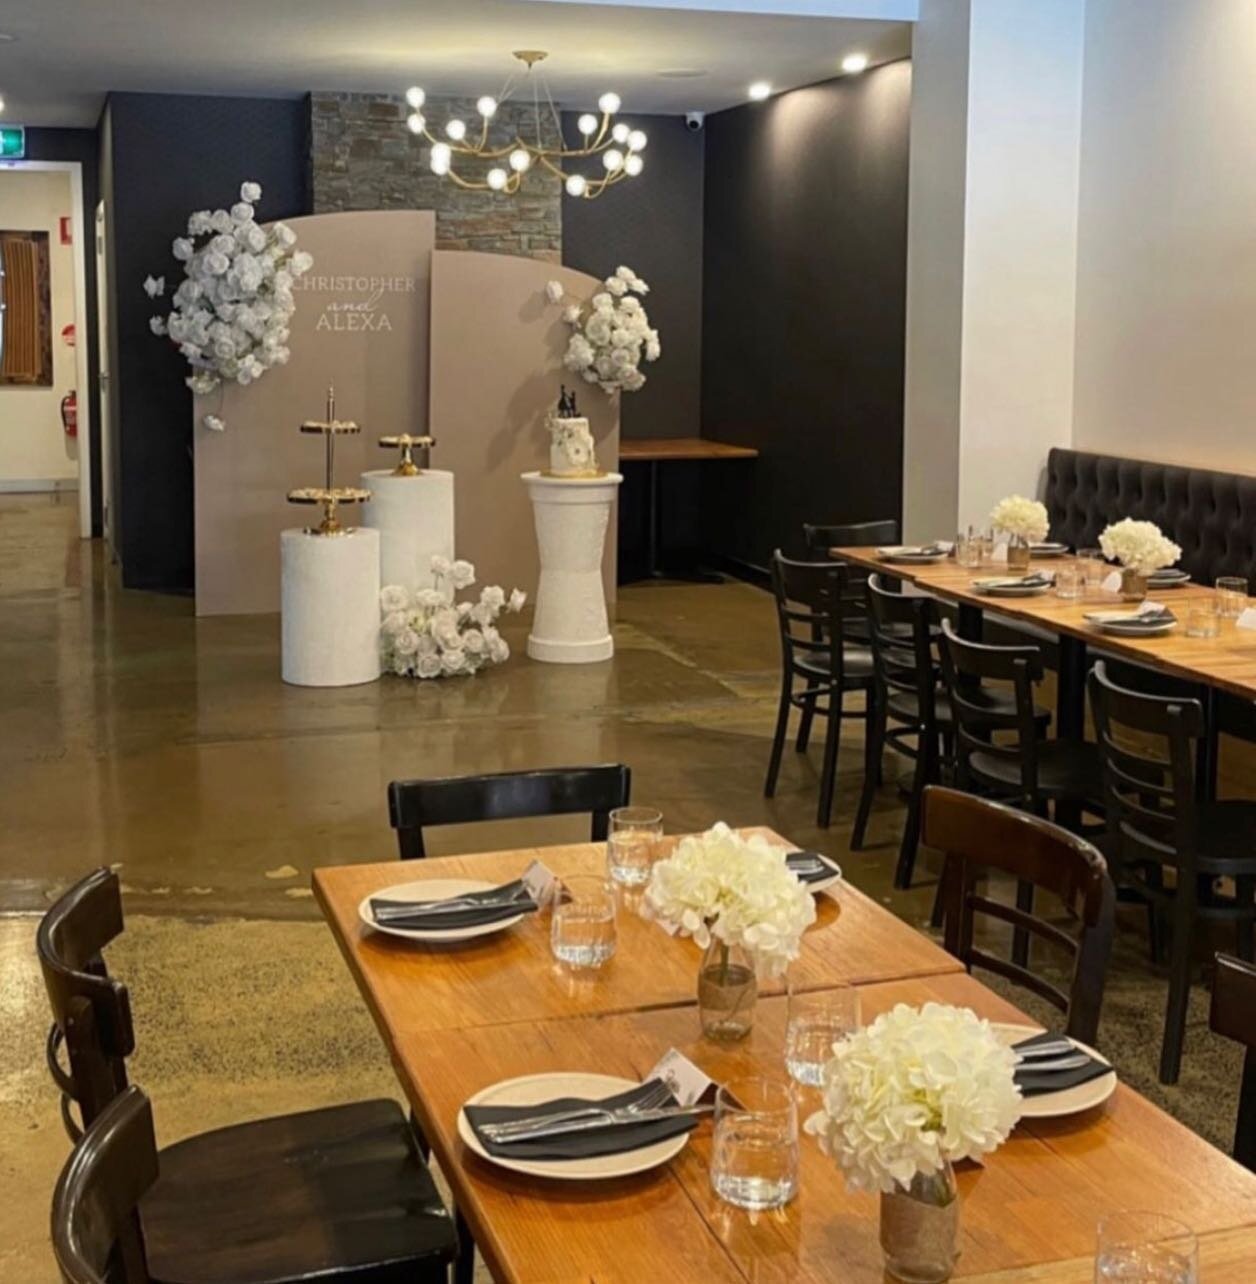 Enquire now for your end of year functions 🥂 
Set menu packages are available.
.
.
.
.
.
#italian #blackrock #melbournefoodie #melbourne #gooditalianfood #modernitalian
#buonappetito